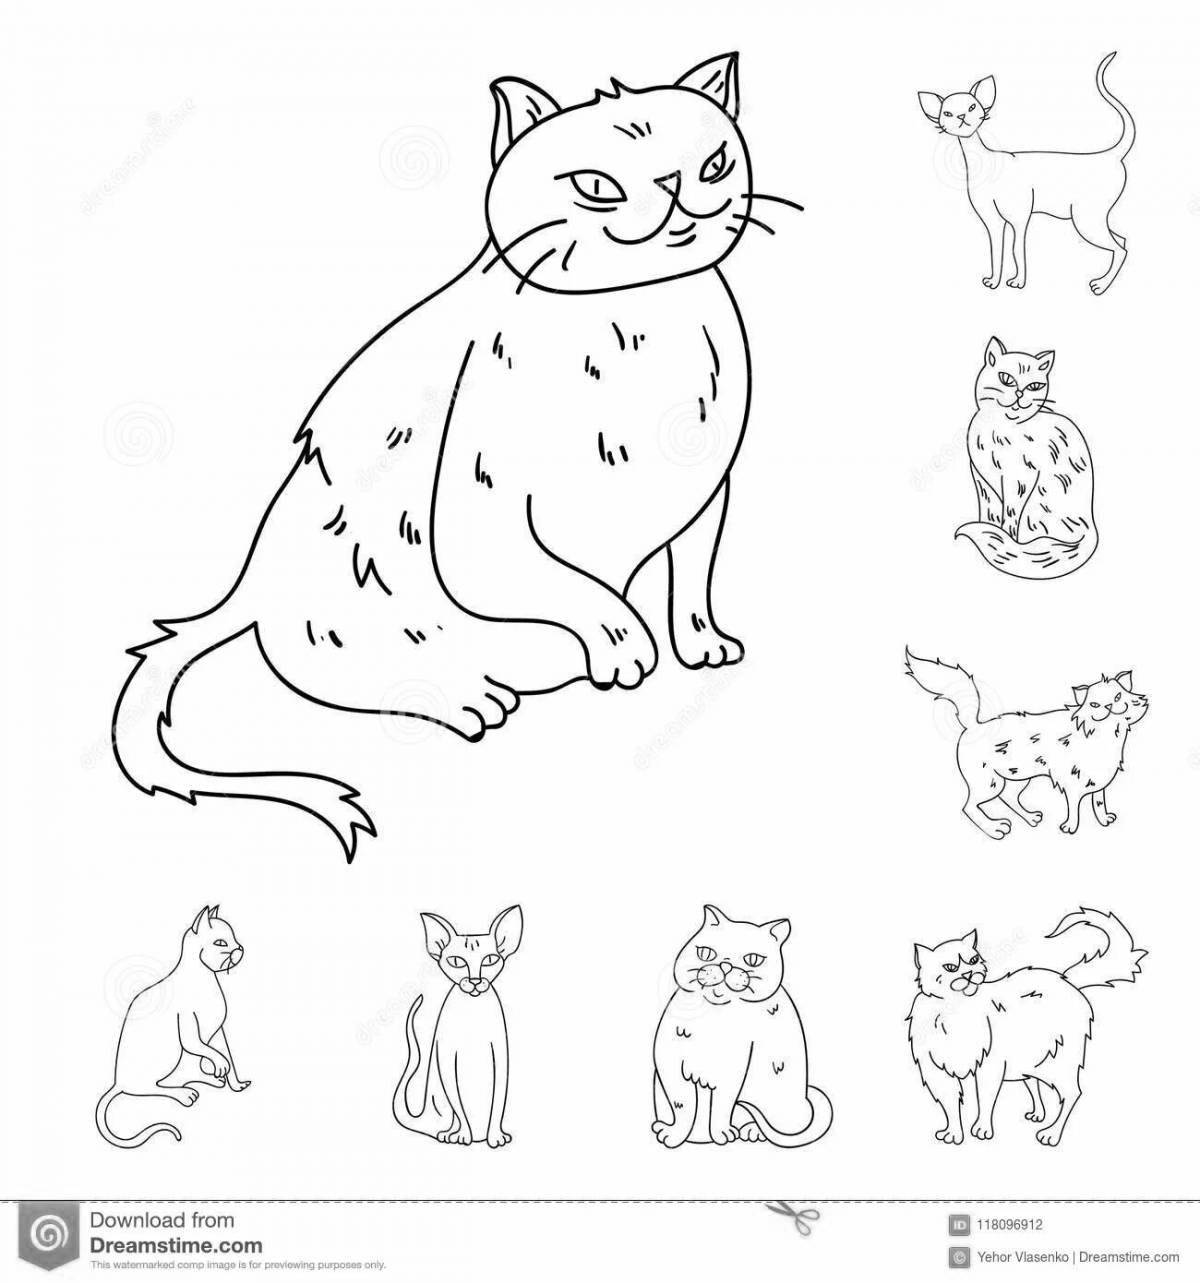 Majestic coloring page of cat breeds with names